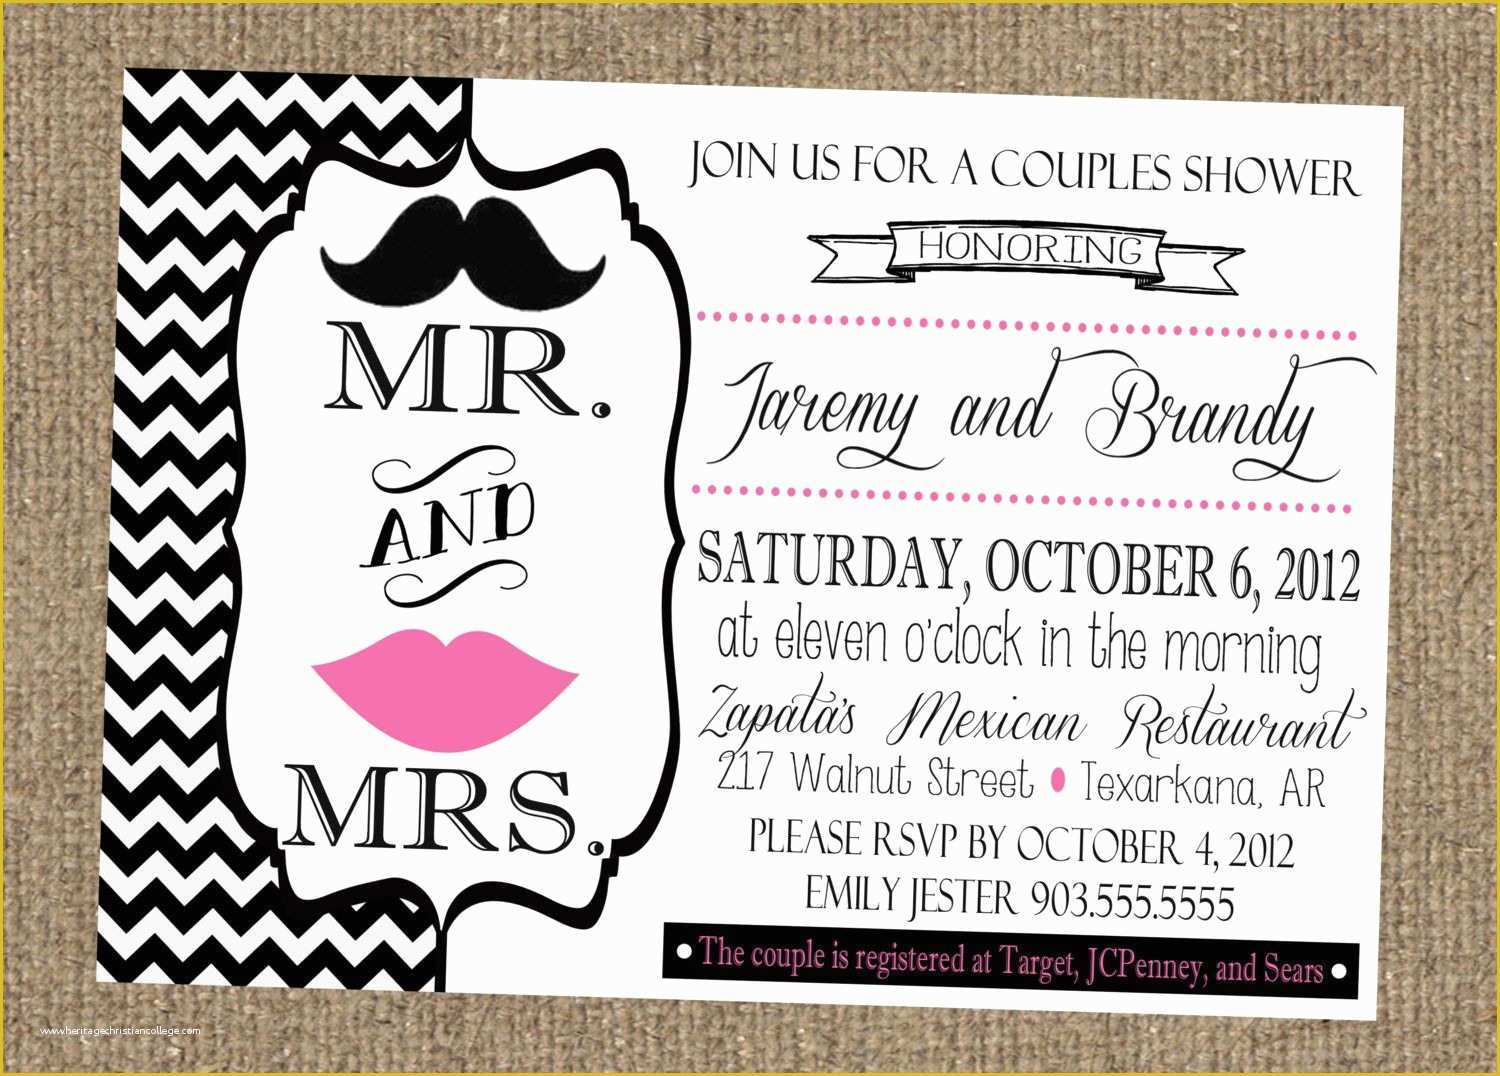 Couples Wedding Shower Invitations Templates Free Of Couples Wedding Shower Invitation Wording Wedding Shower